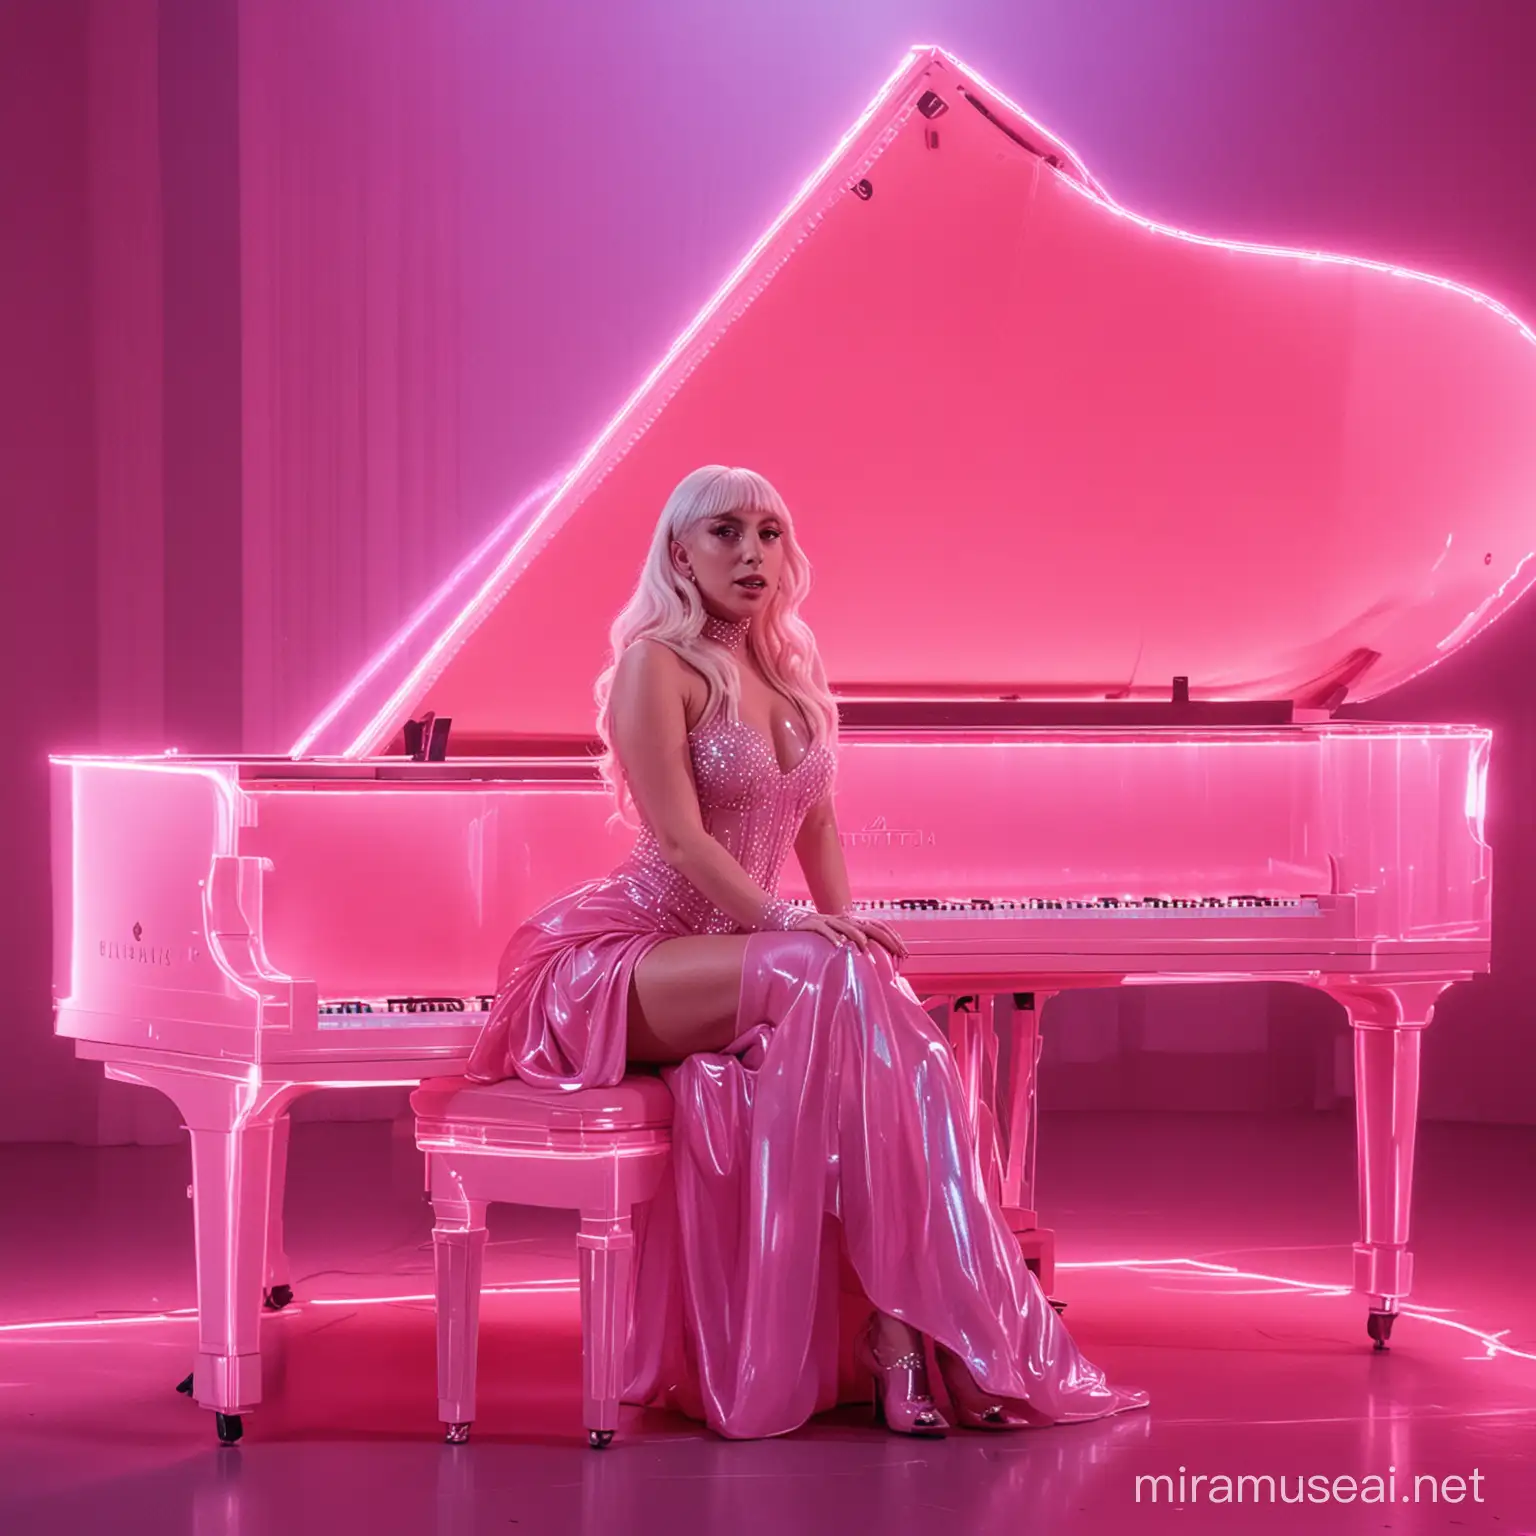 Lady Gaga in Chromatica Tour Outfit with Pink Holographic Piano